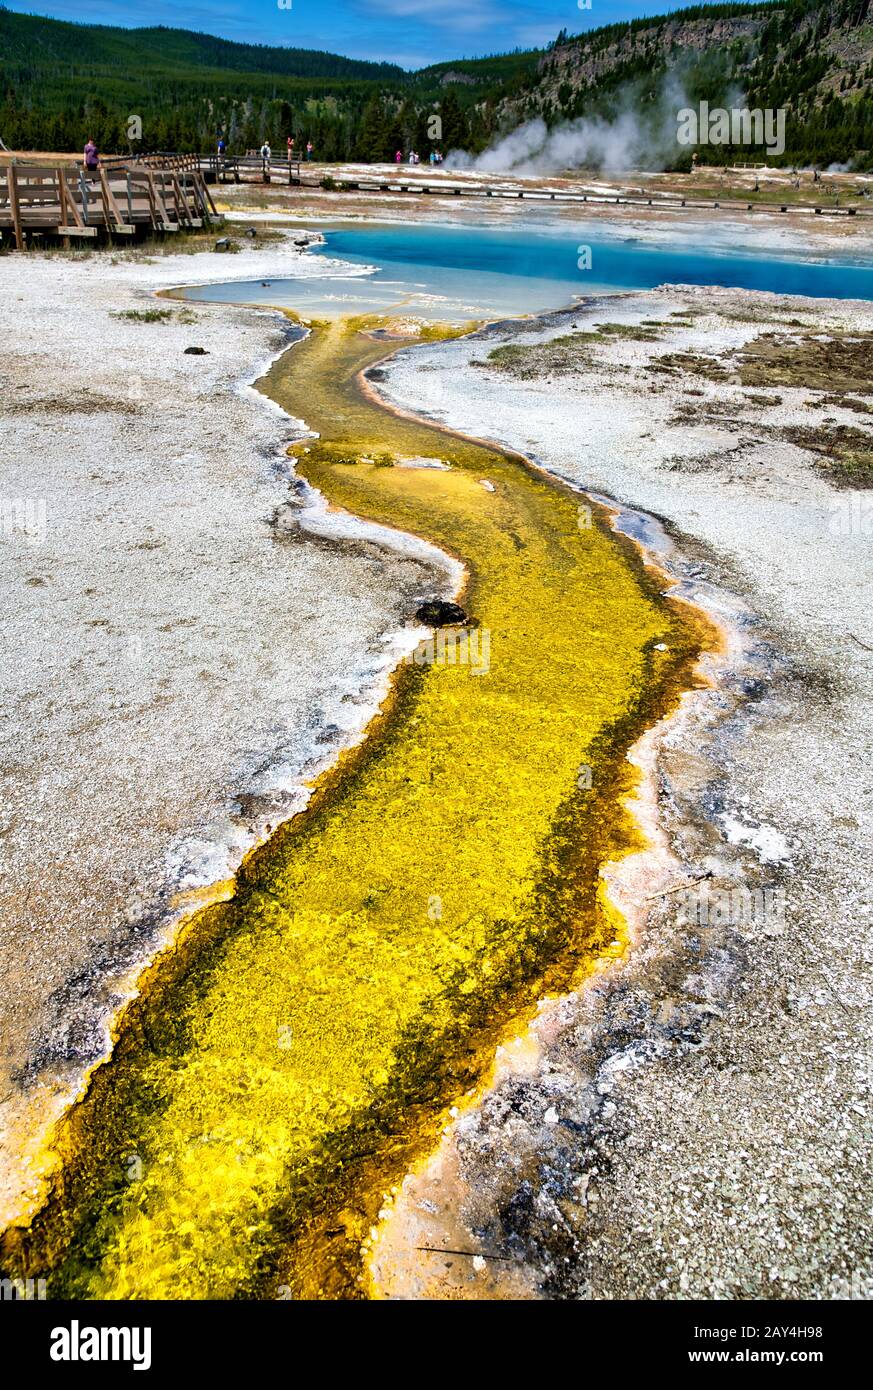 Creek und Pool in Biscuit Basin, Yellowstone National Park, Wyoming. Stockfoto